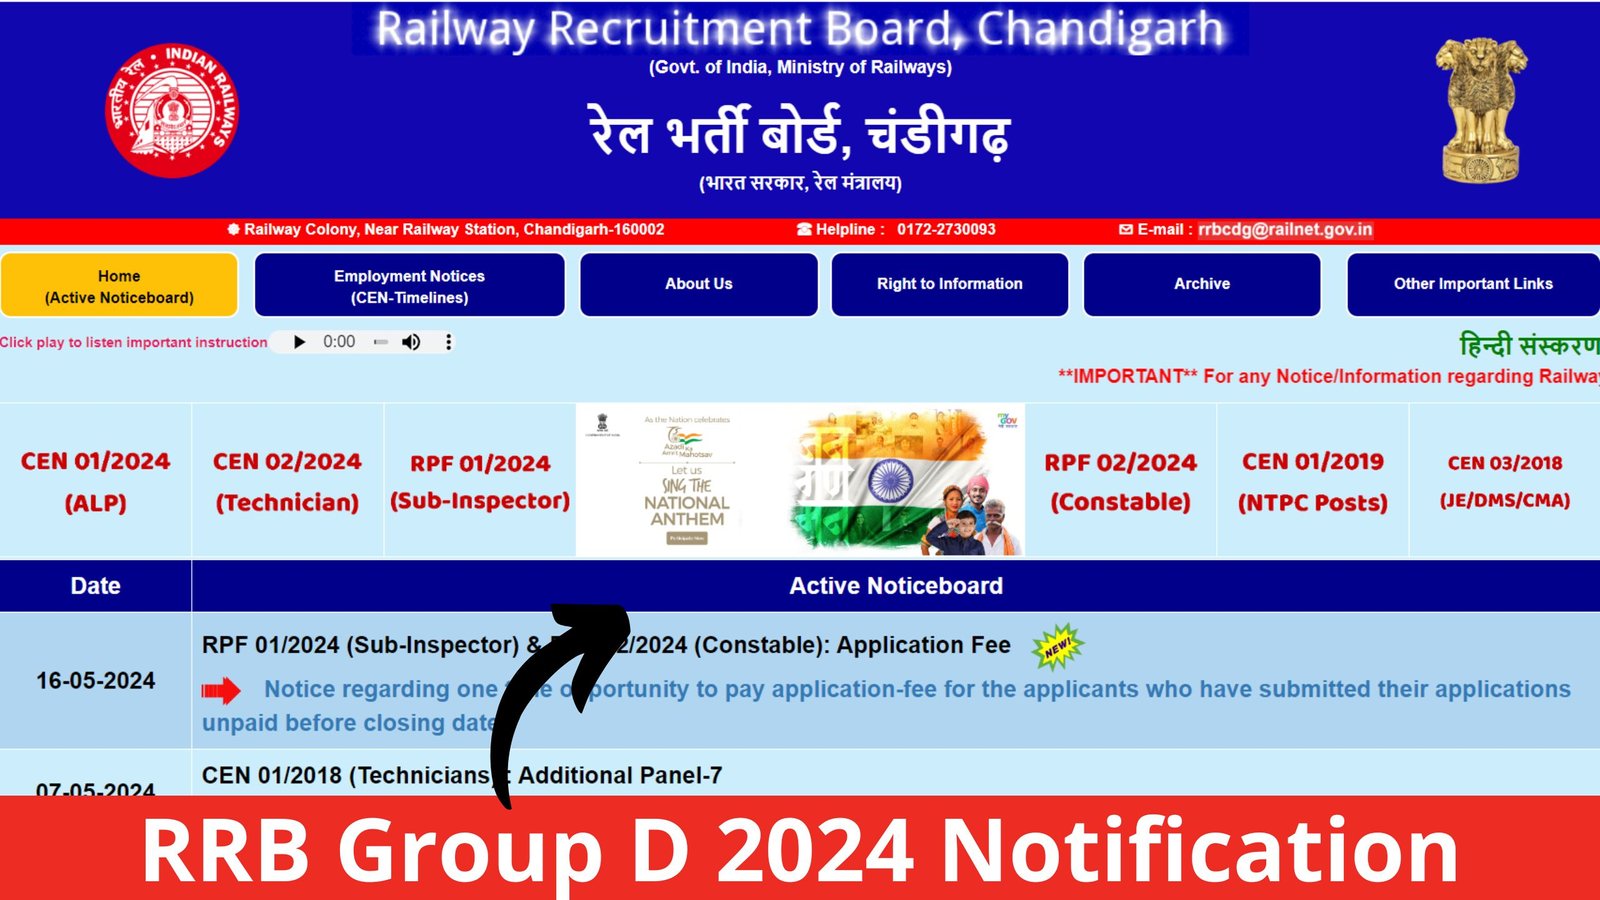 RRB Group D 2024 Notification,